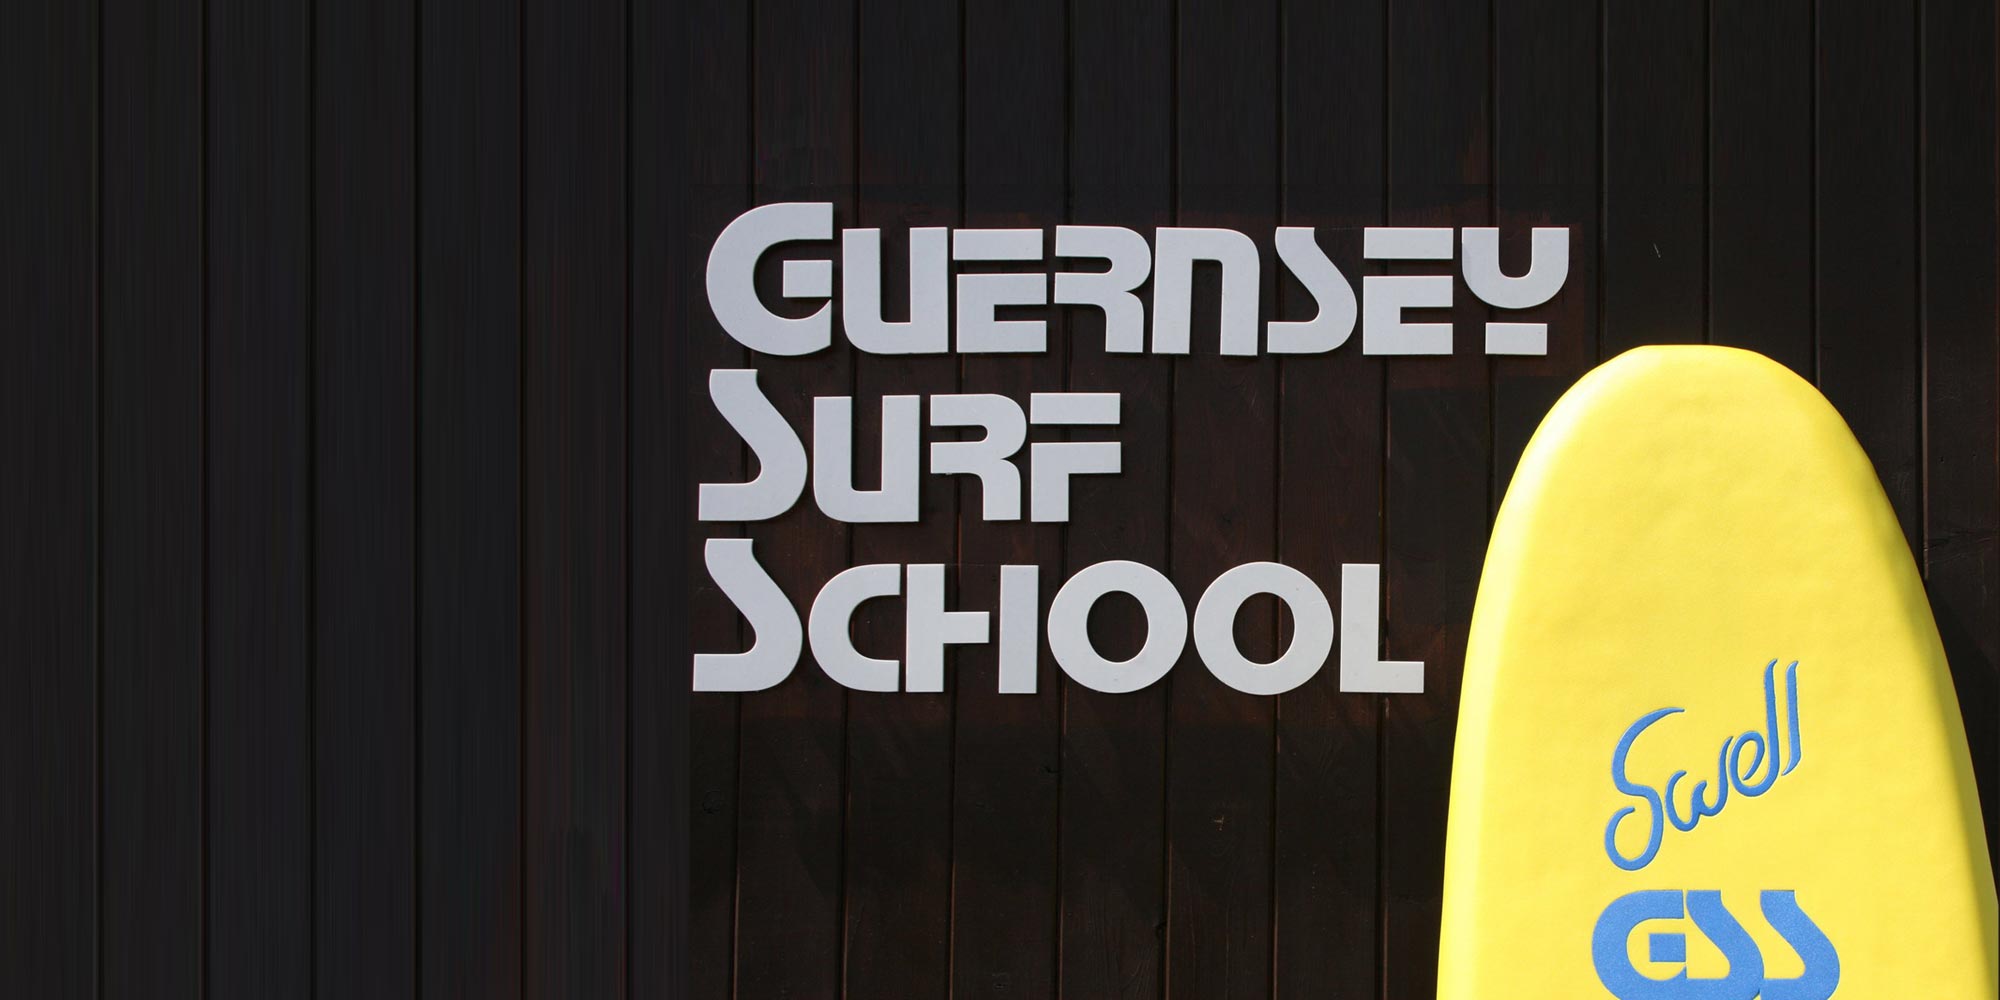 surfboard bodyboard and wetsuit hire at vazon bay with the guernsey surf school